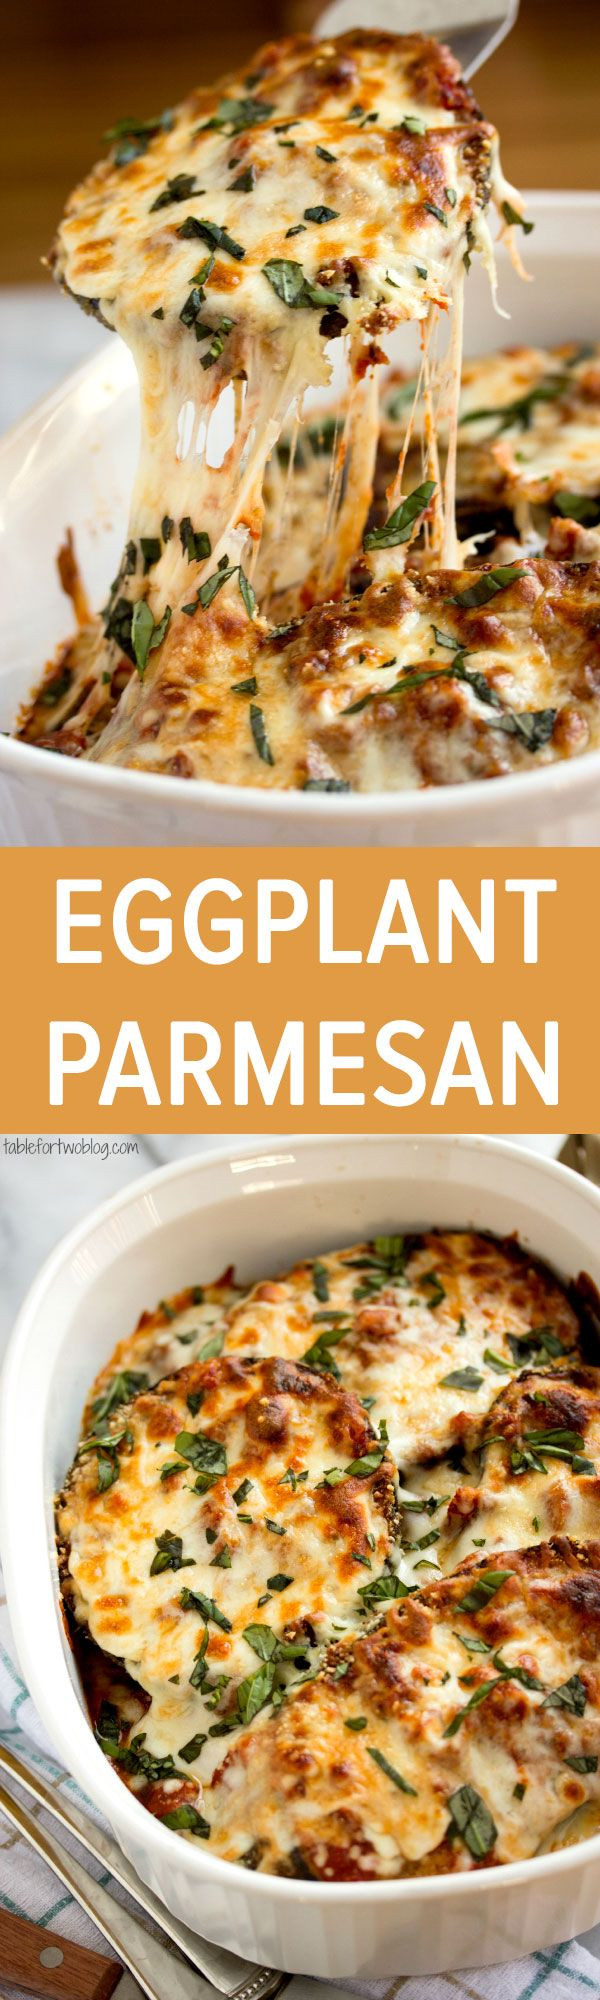 Healthy Eggplant Recipes For Dinner
 Eggplant Parmesan is really filling super flavorful